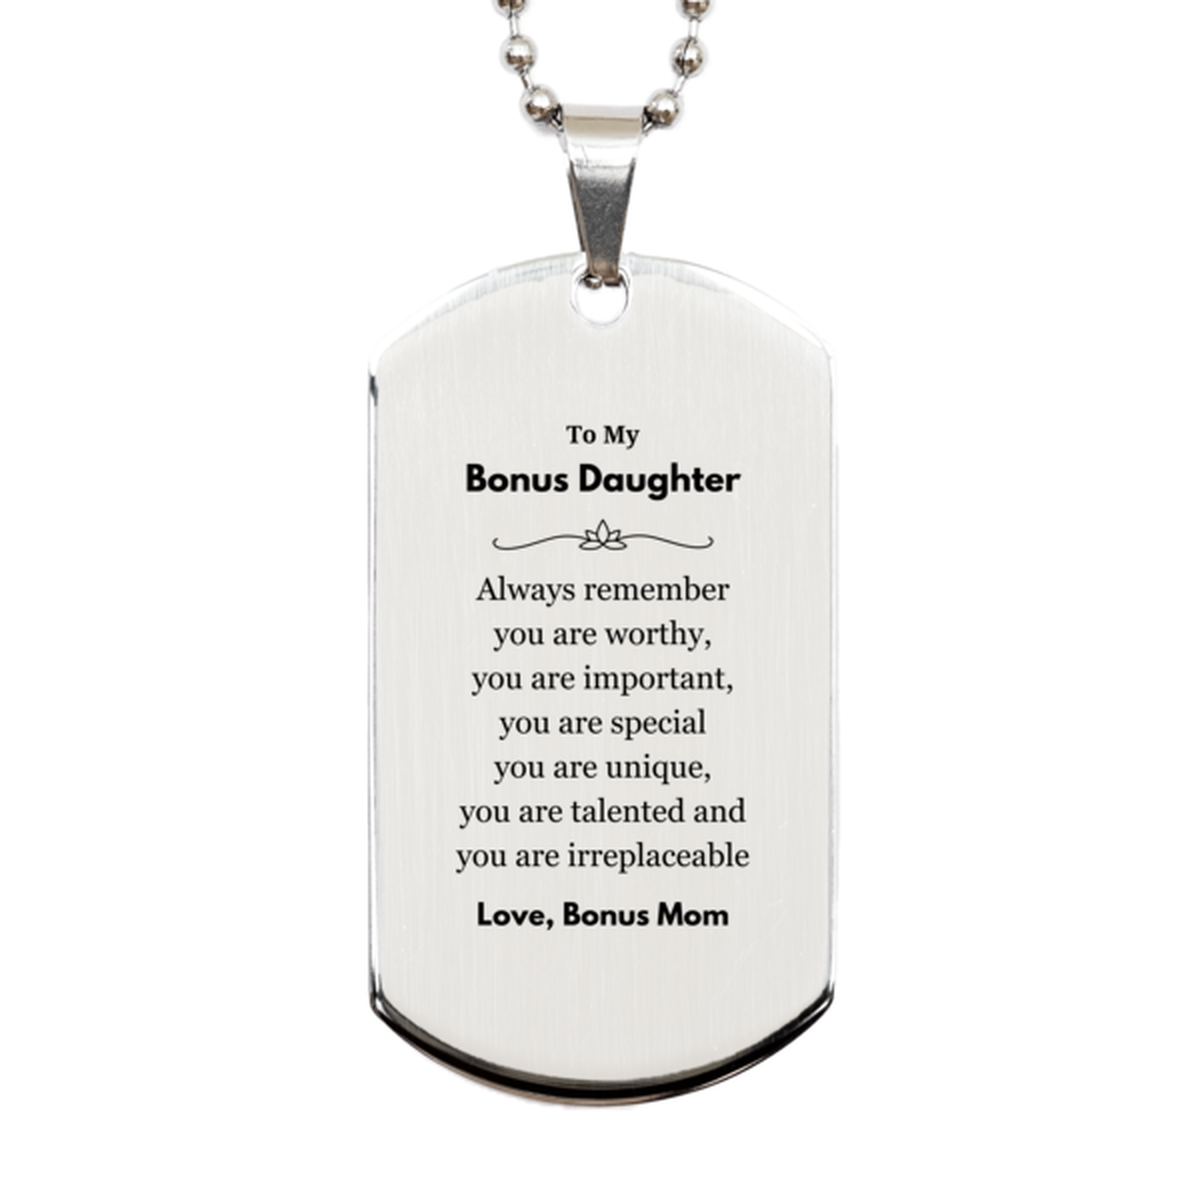 Bonus Daughter Birthday Gifts from Bonus Mom, Inspirational Silver Dog Tag for Bonus Daughter Christmas Graduation Gifts for Bonus Daughter Always remember you are worthy, you are important. Love, Bonus Mom